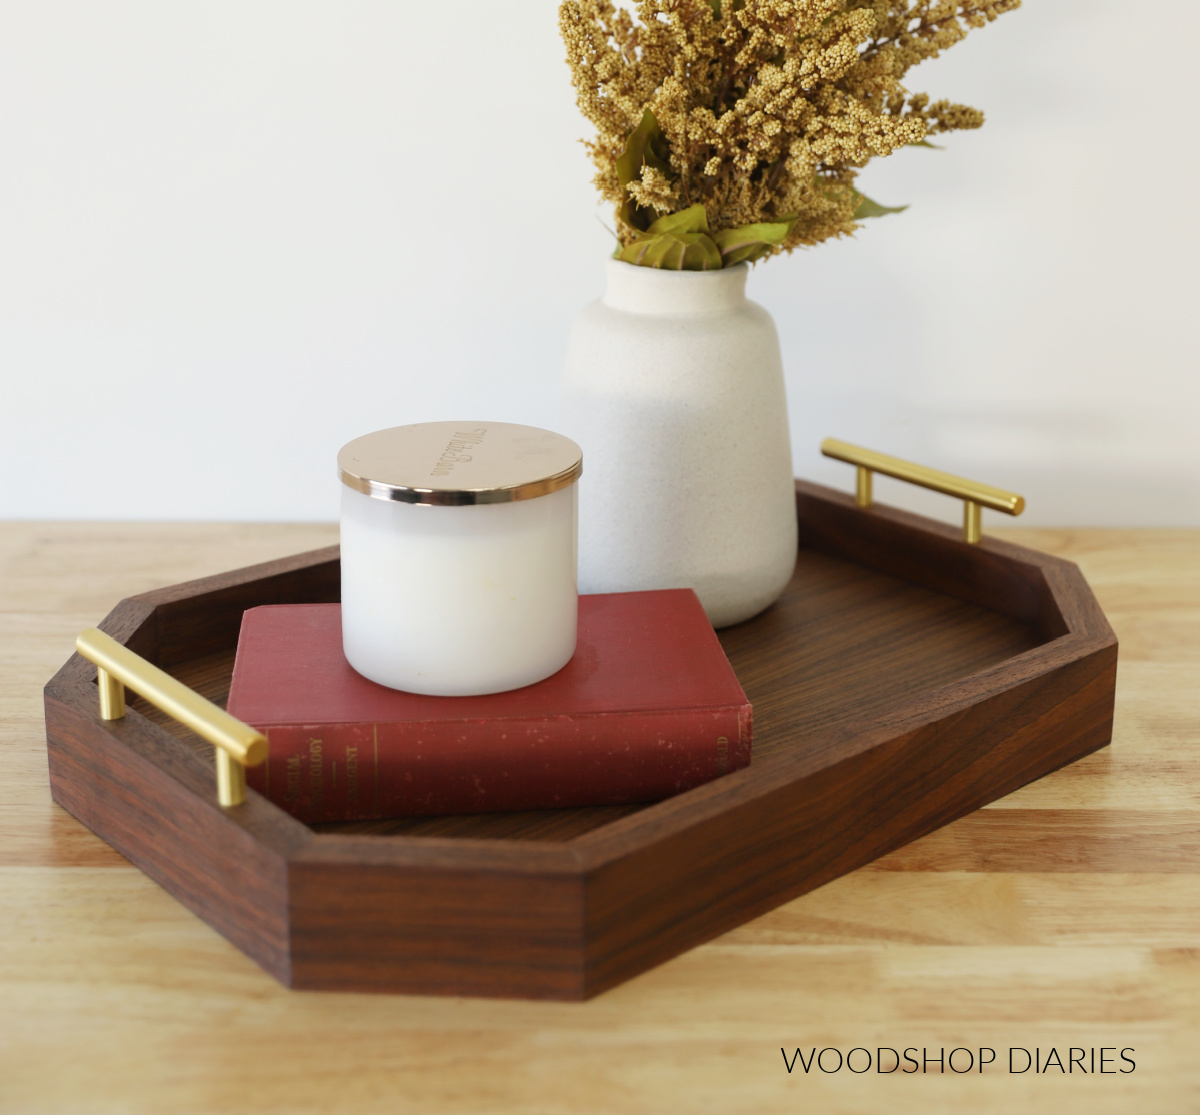 Modern DIY walnut serving tray with brass handles finished on countertop with vase, book and candle